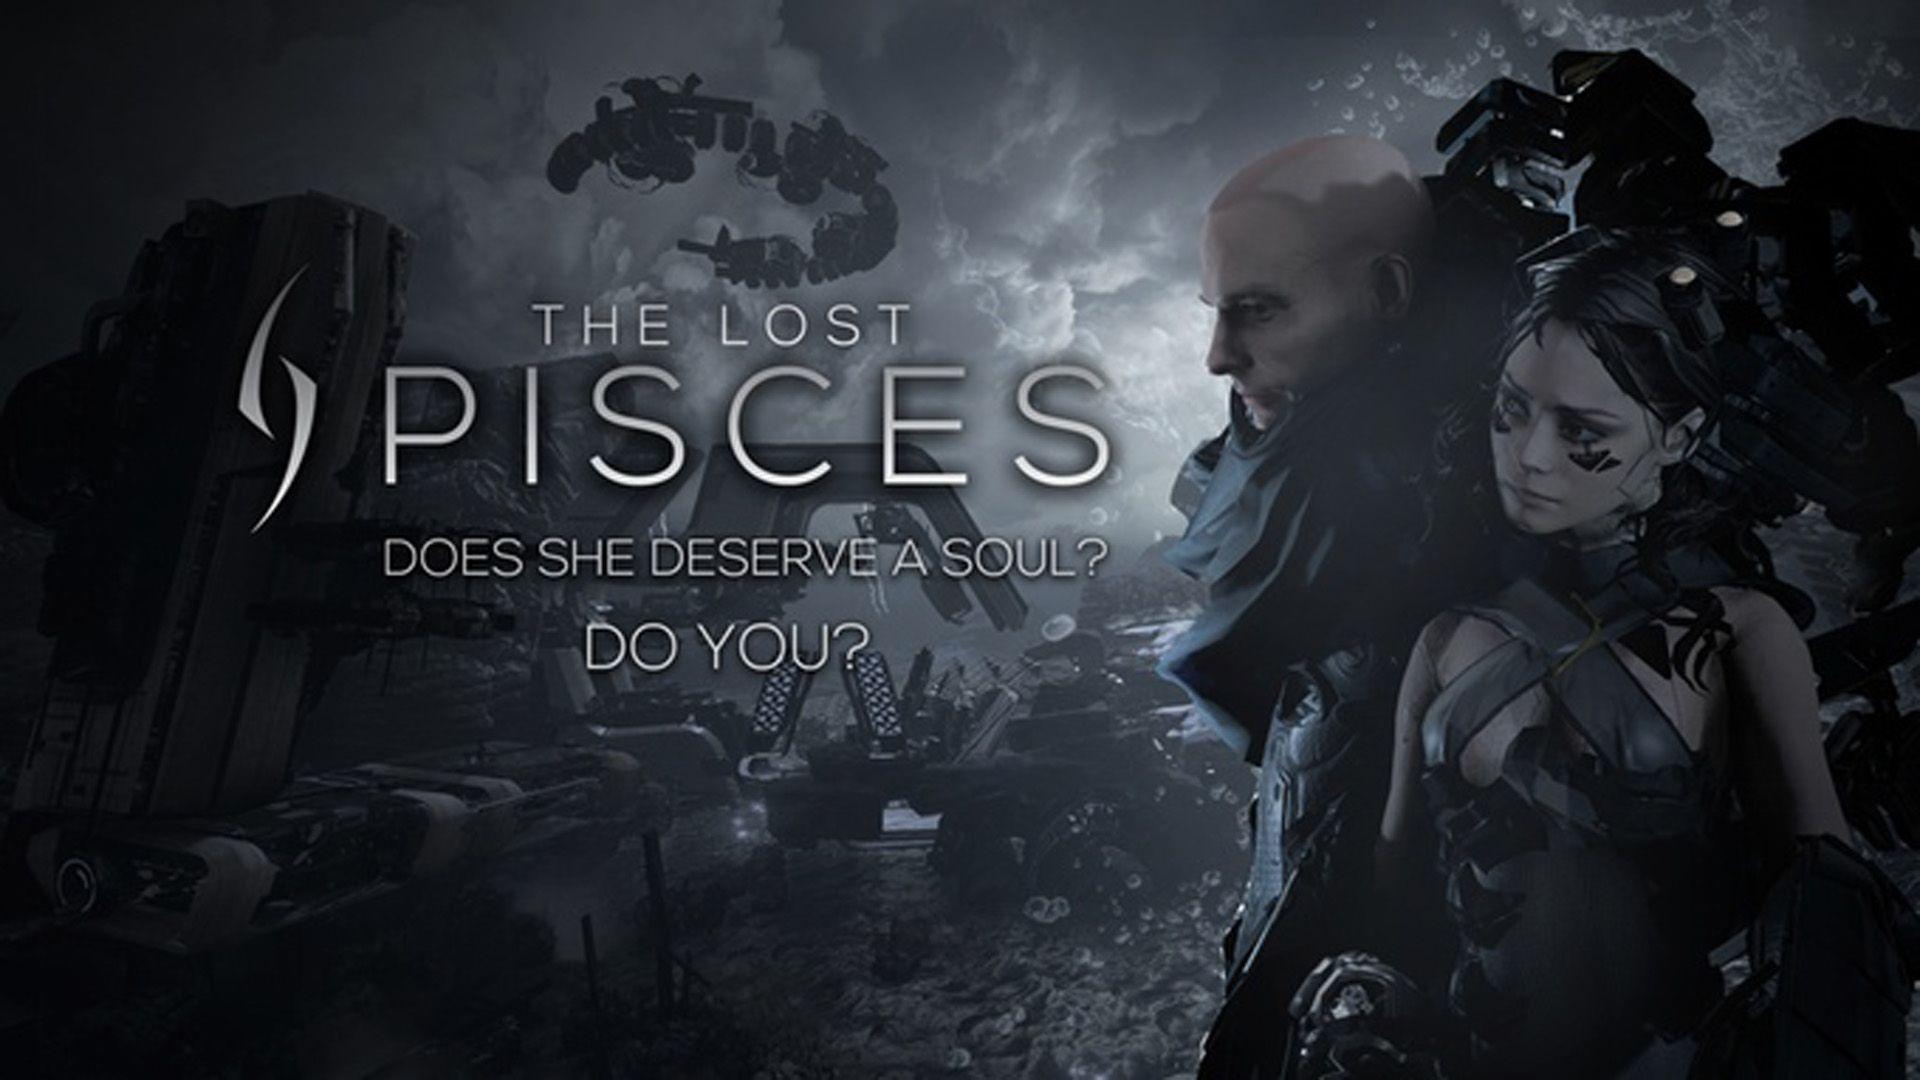 The Lost Pisces Video Game Poster Wallpaper